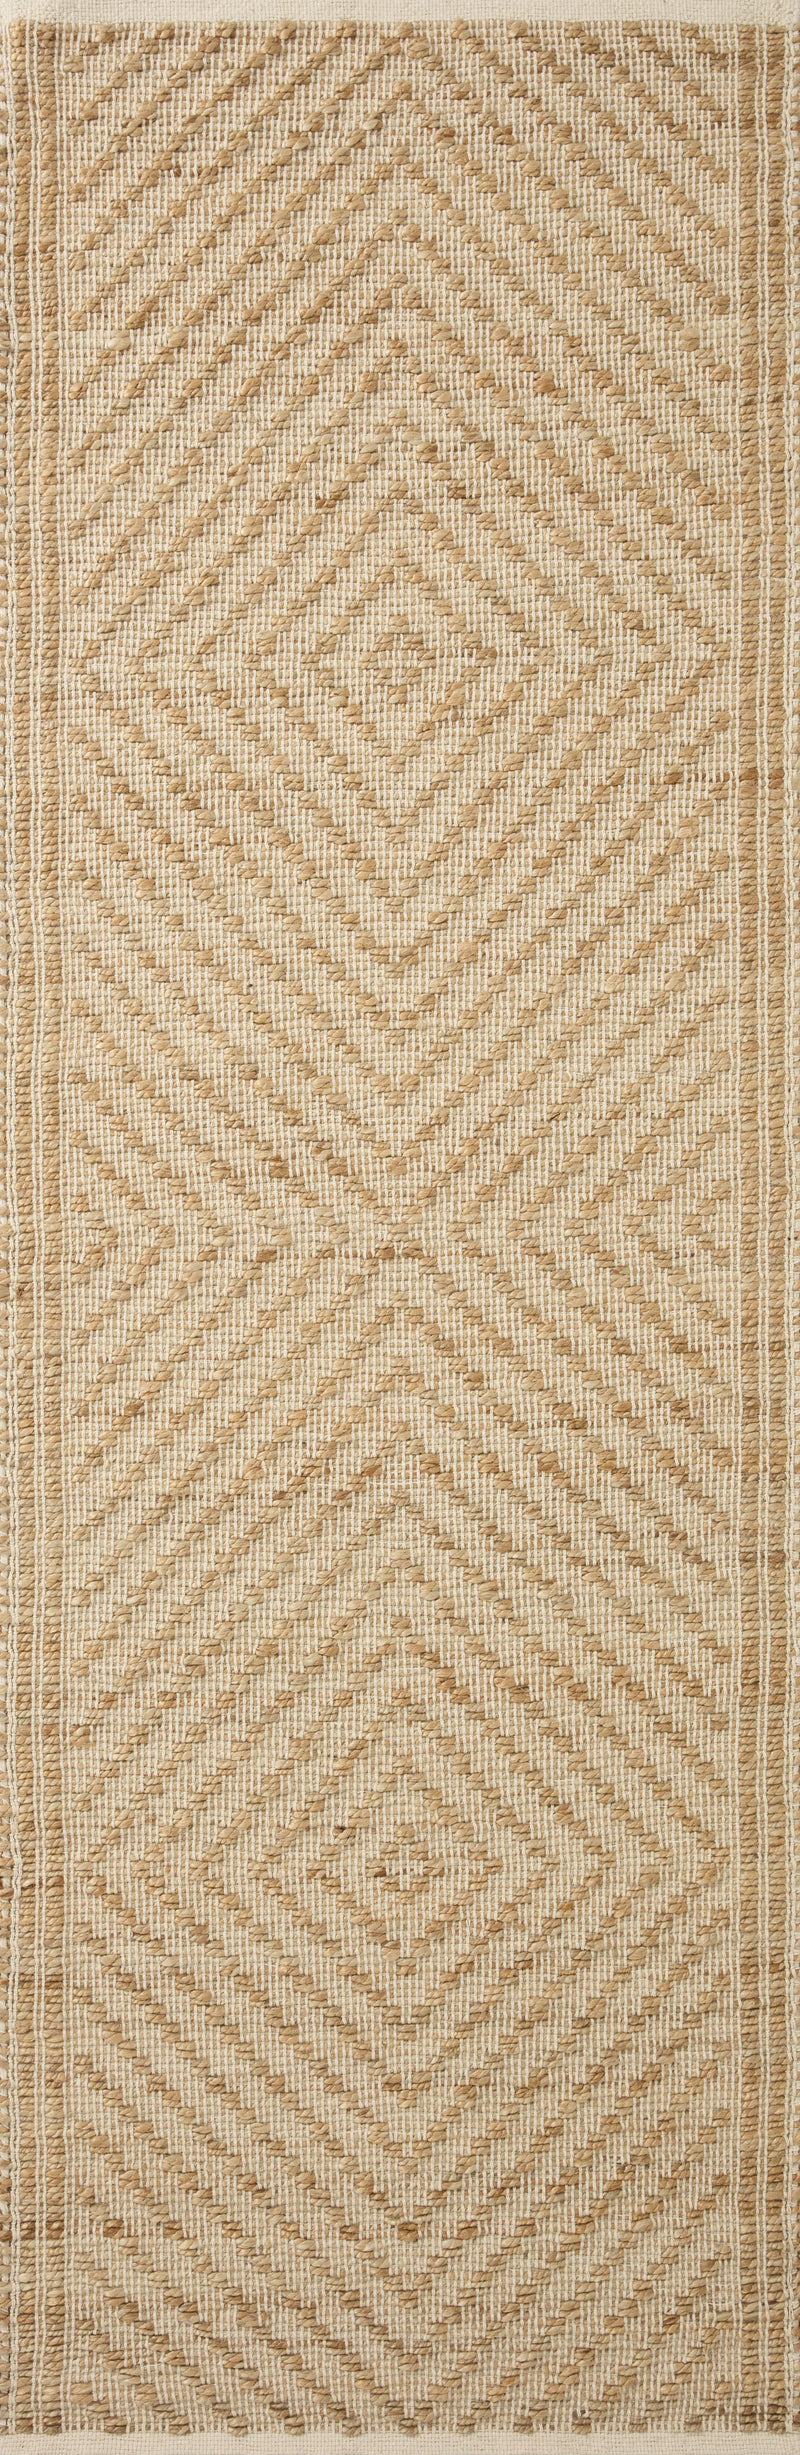 media image for colton hand woven natural ivory rug by angela rose x loloi colocon 04naiv2030 2 28